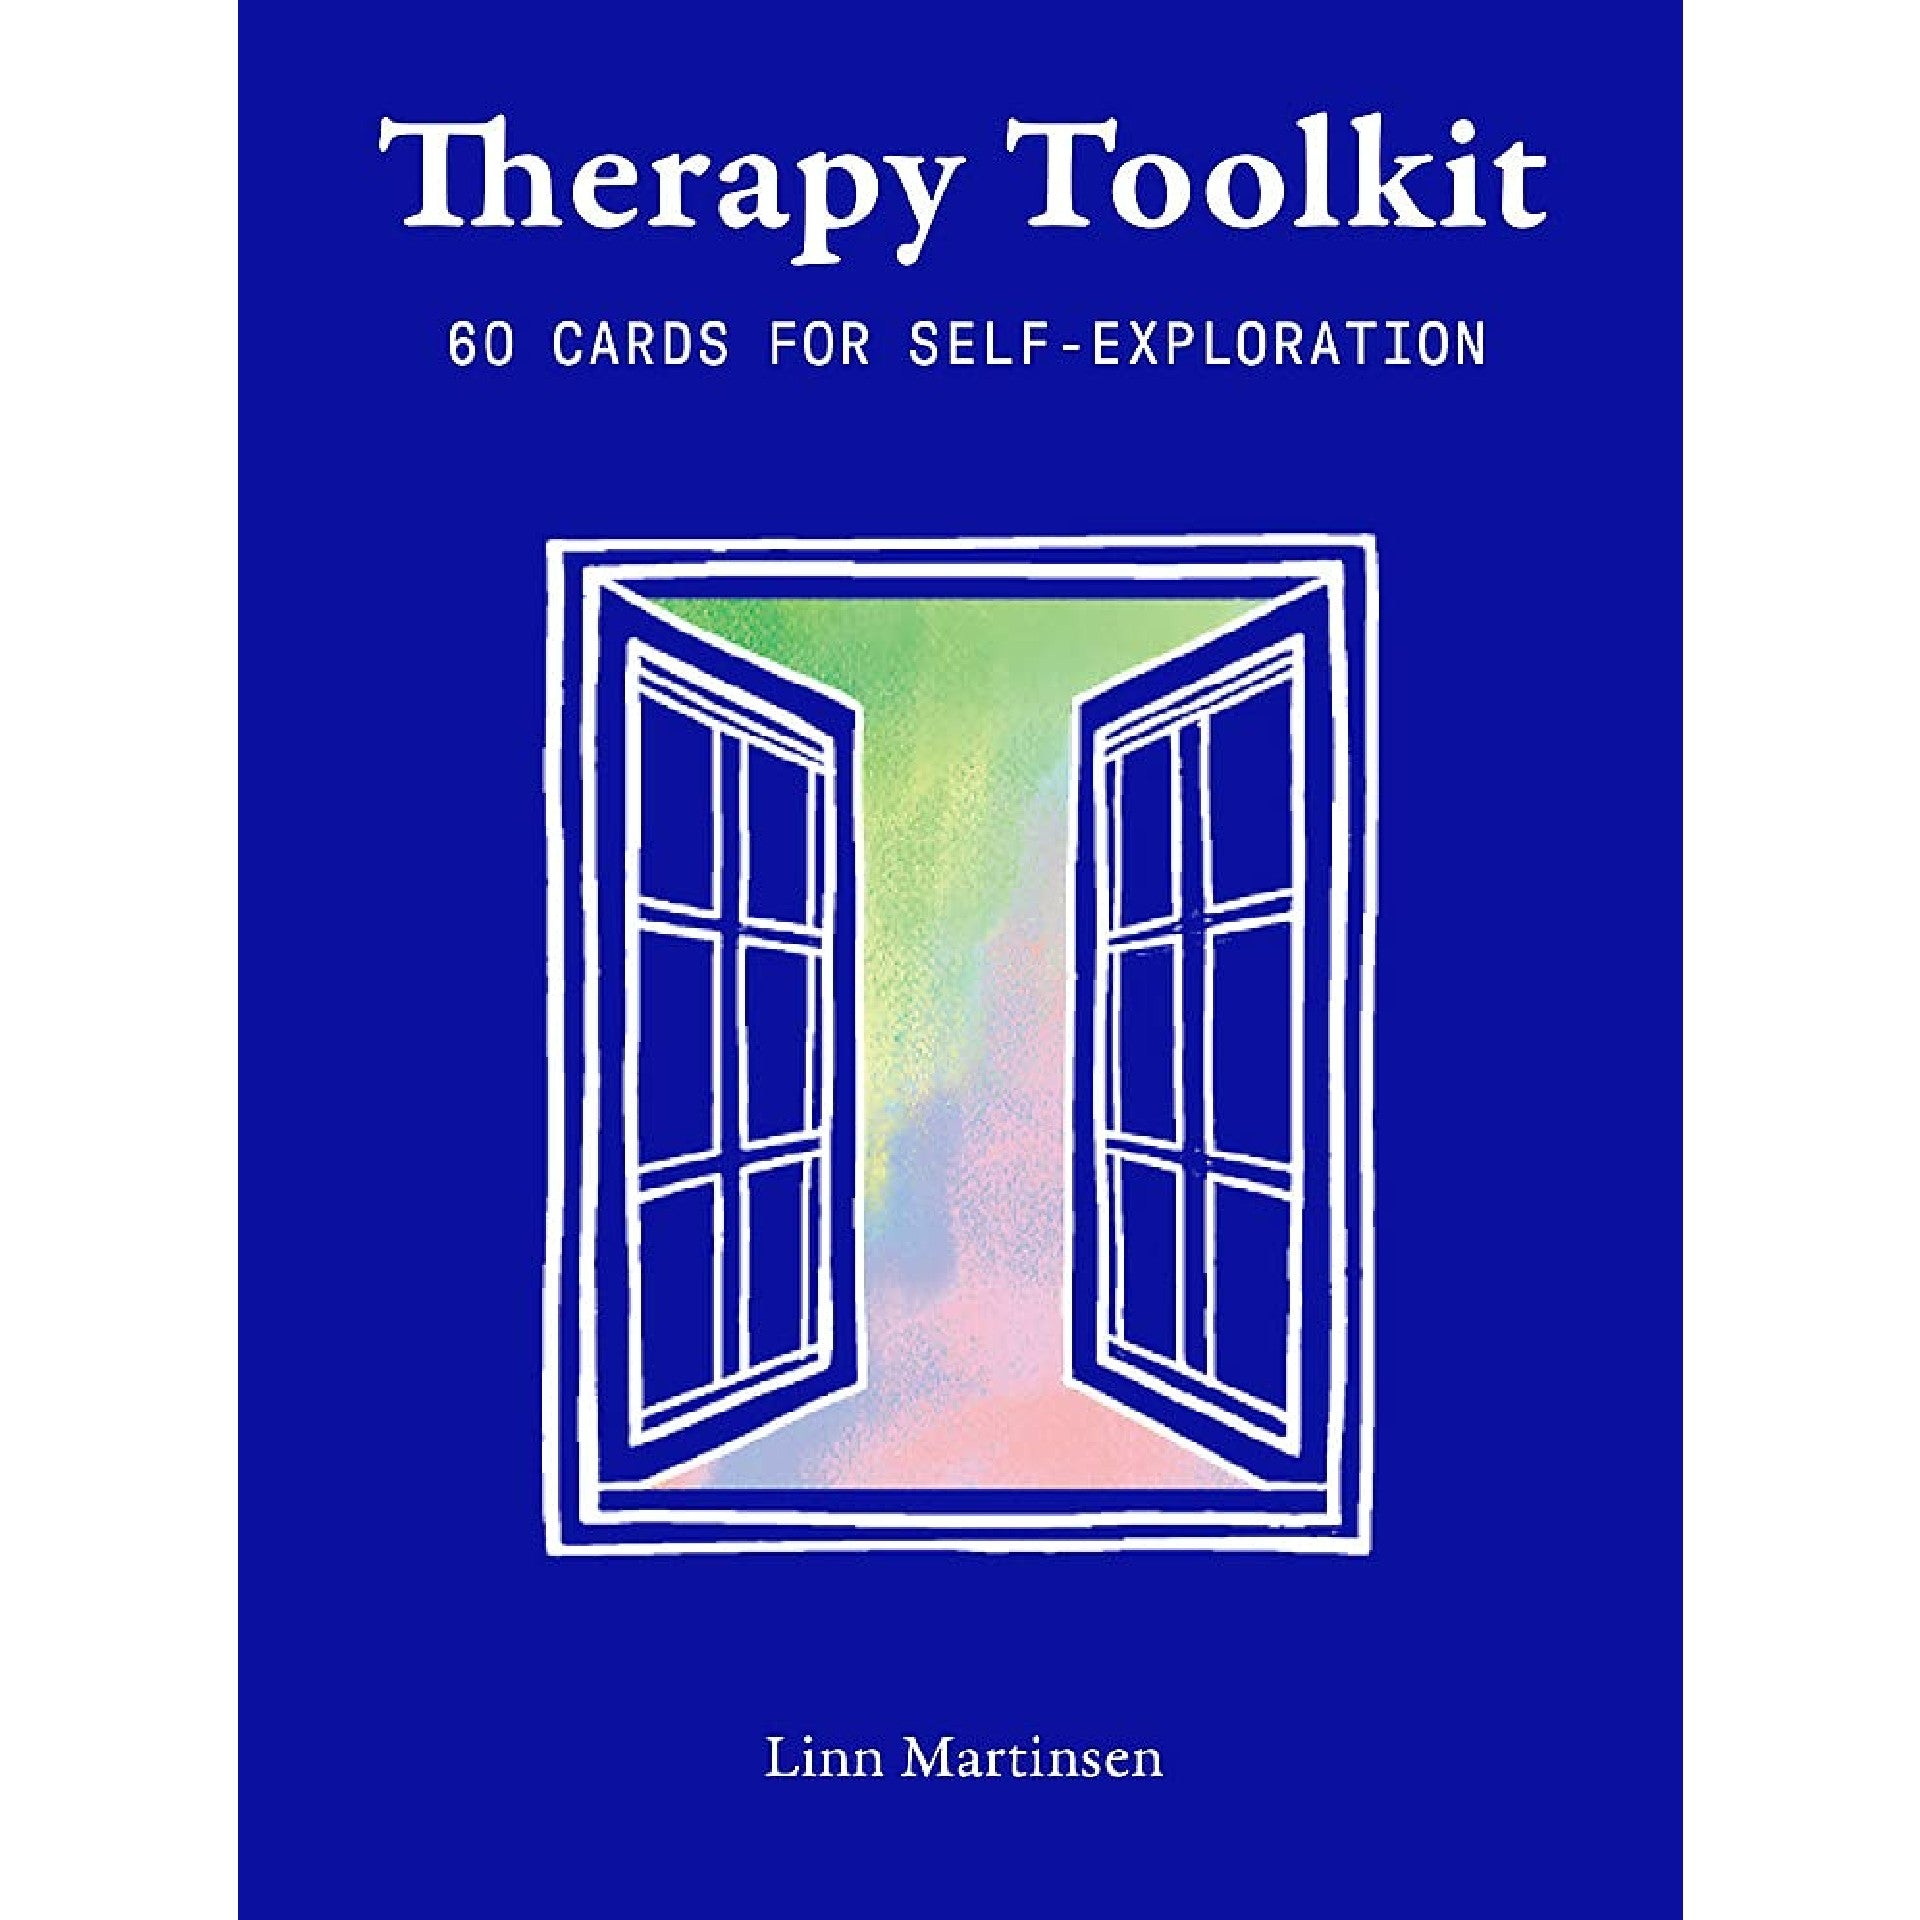 The Therapy Toolkit